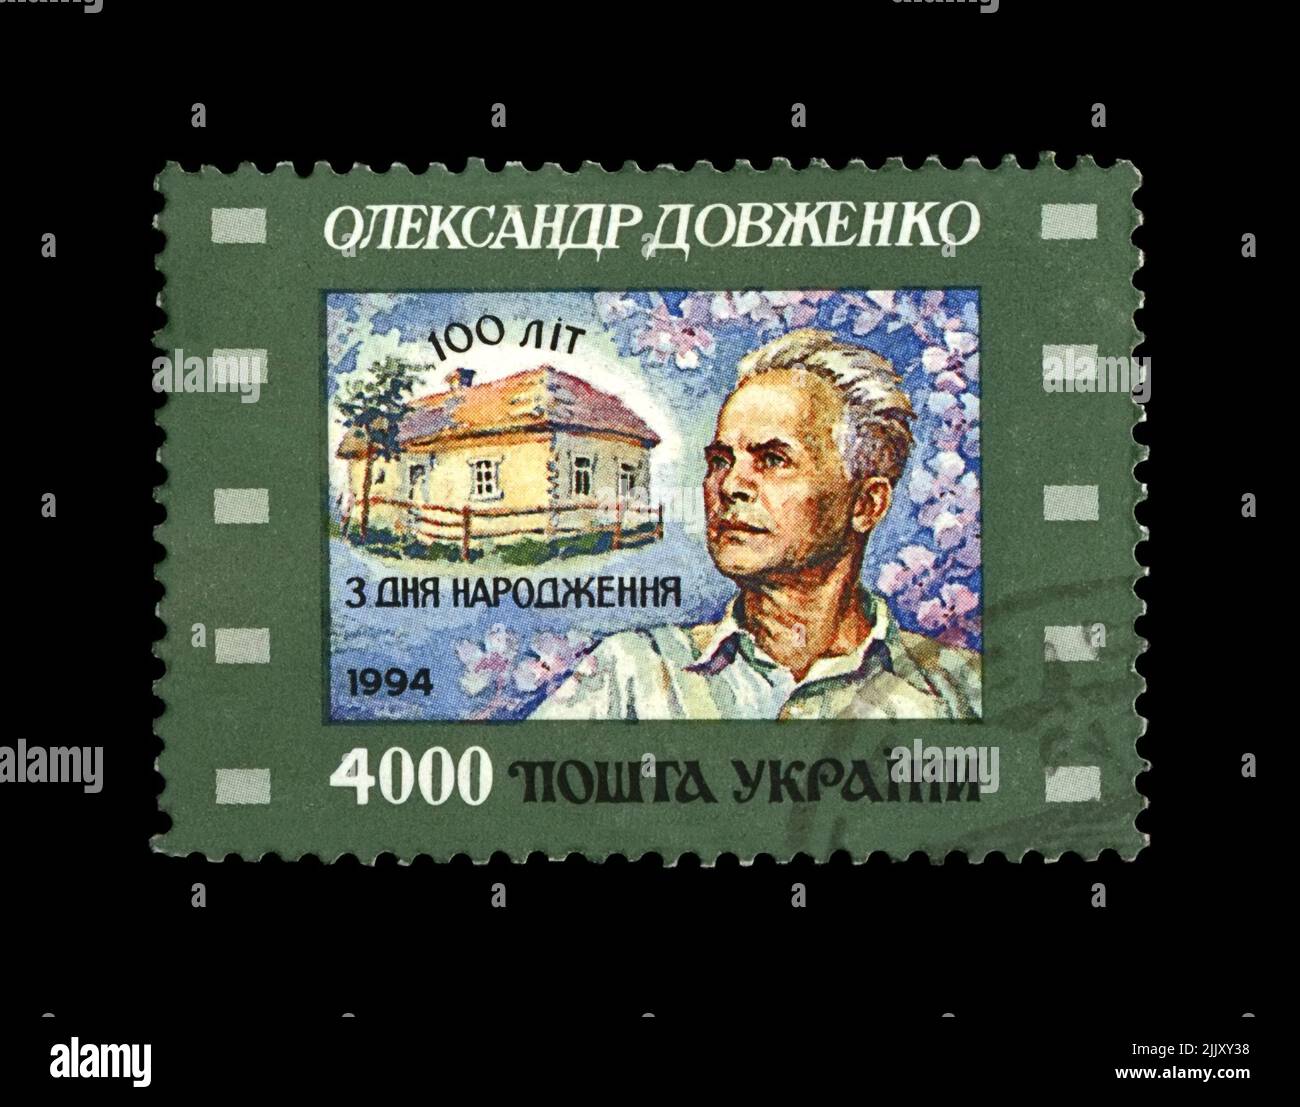 Alexander Dovzhenko, circa 1994. stamp printed in Ukraine shows famous ukrainian film producer vintage post stamp isolated on black background. Stock Photo